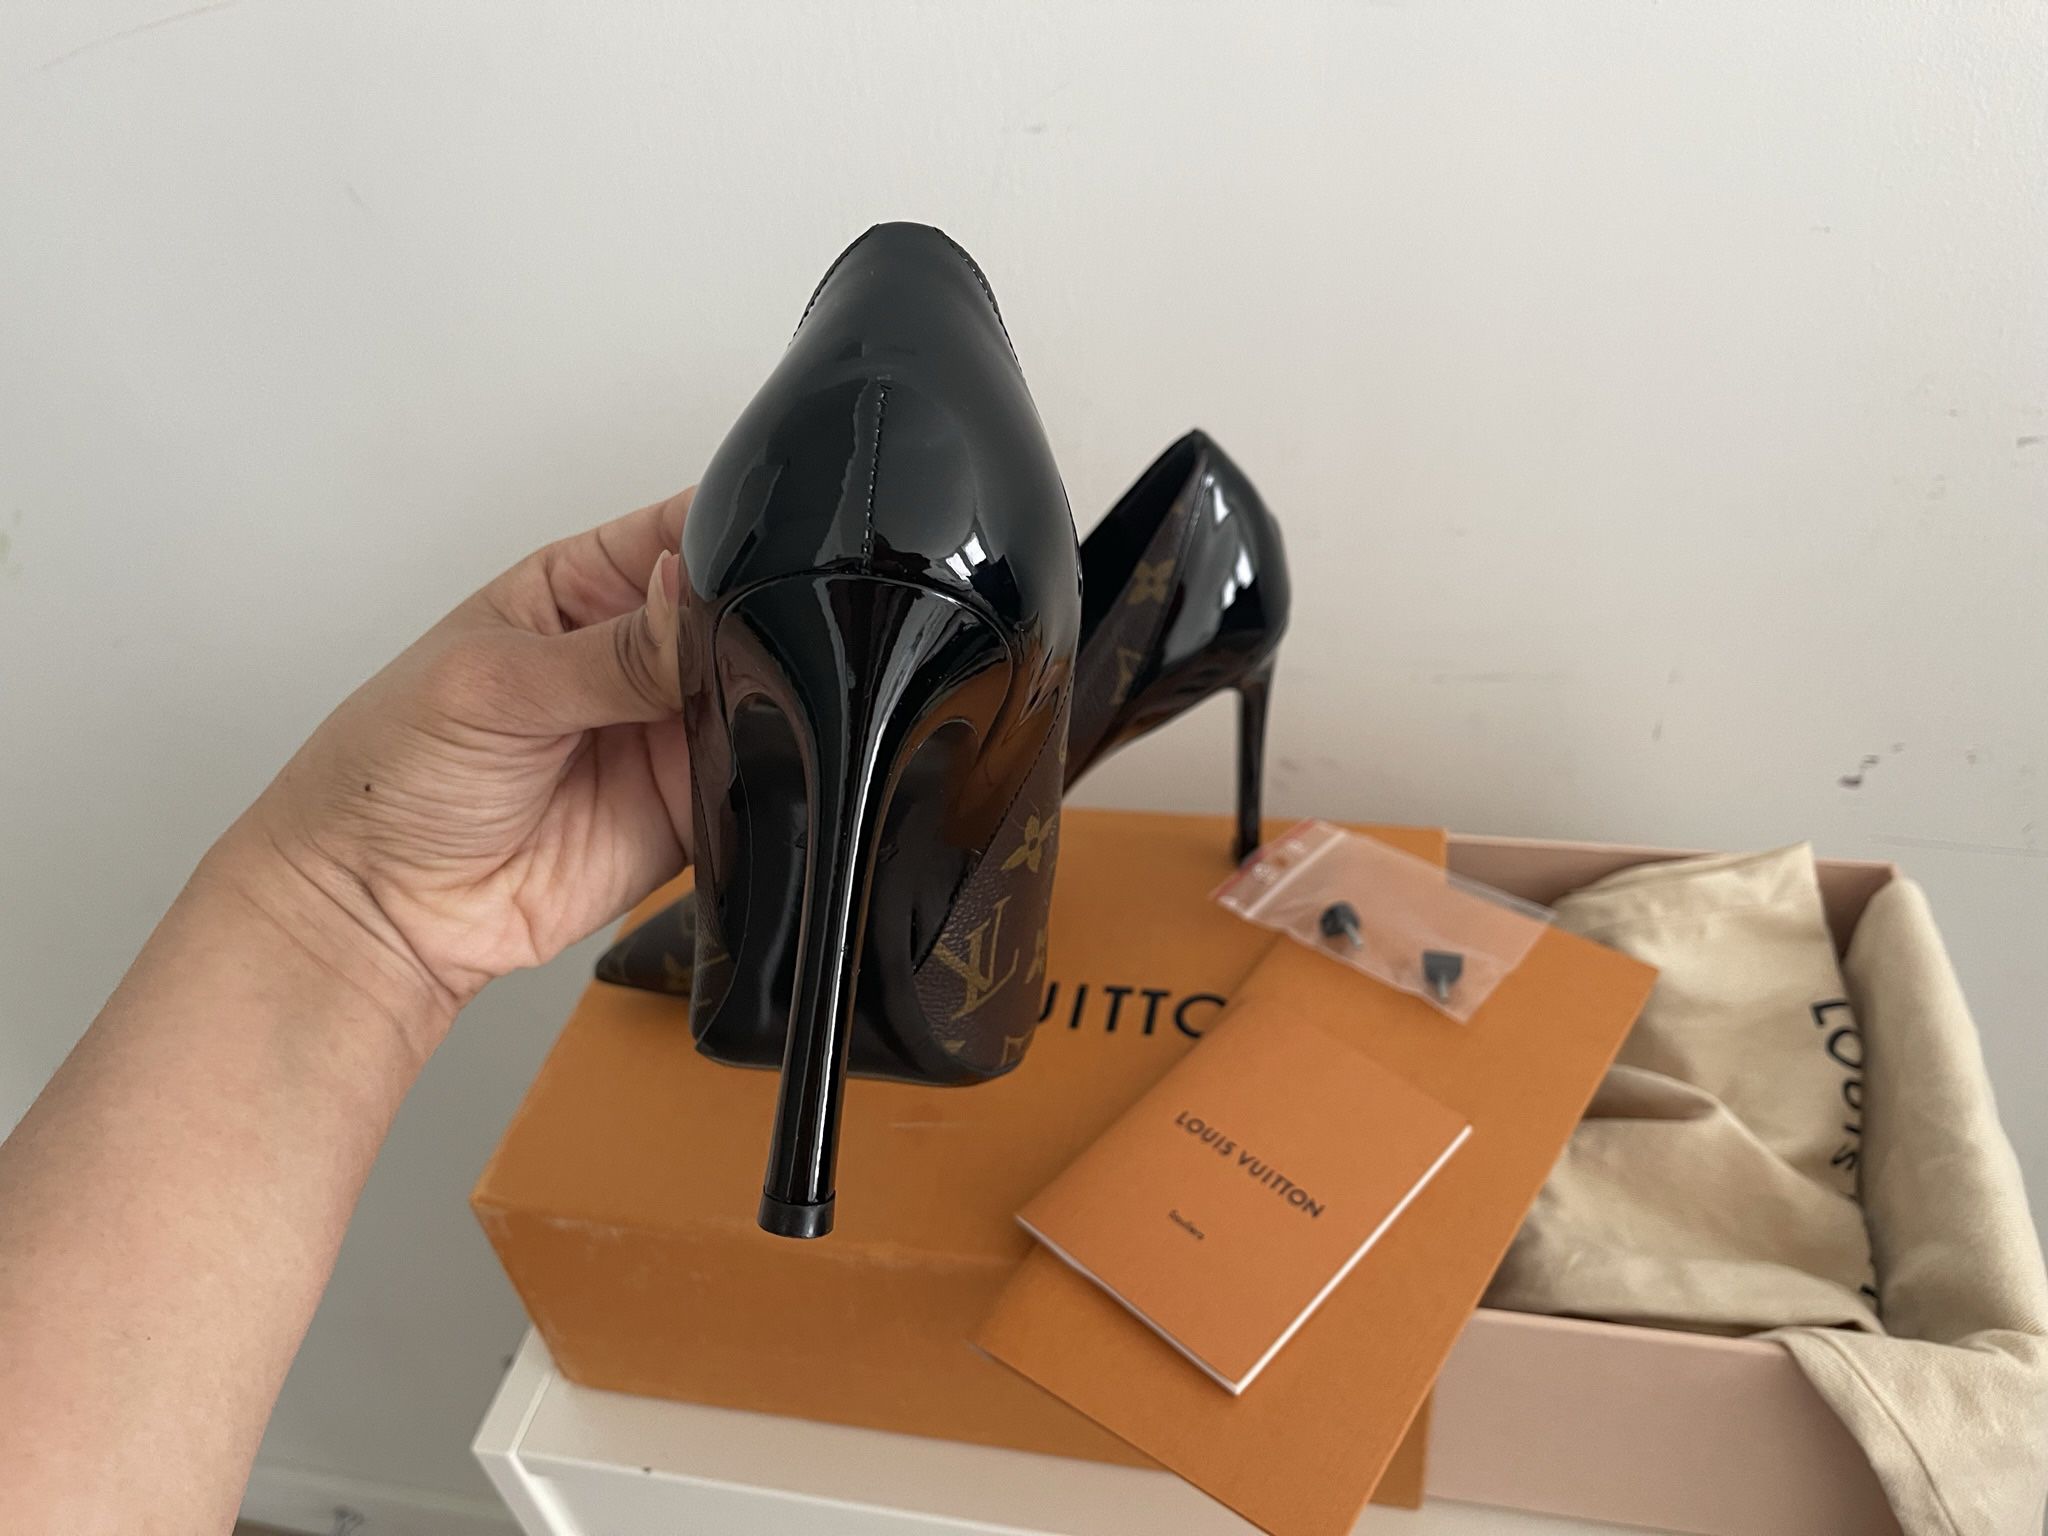 Louis Vuitton Cherie Pumps for Sale in Brooklyn, NY - OfferUp